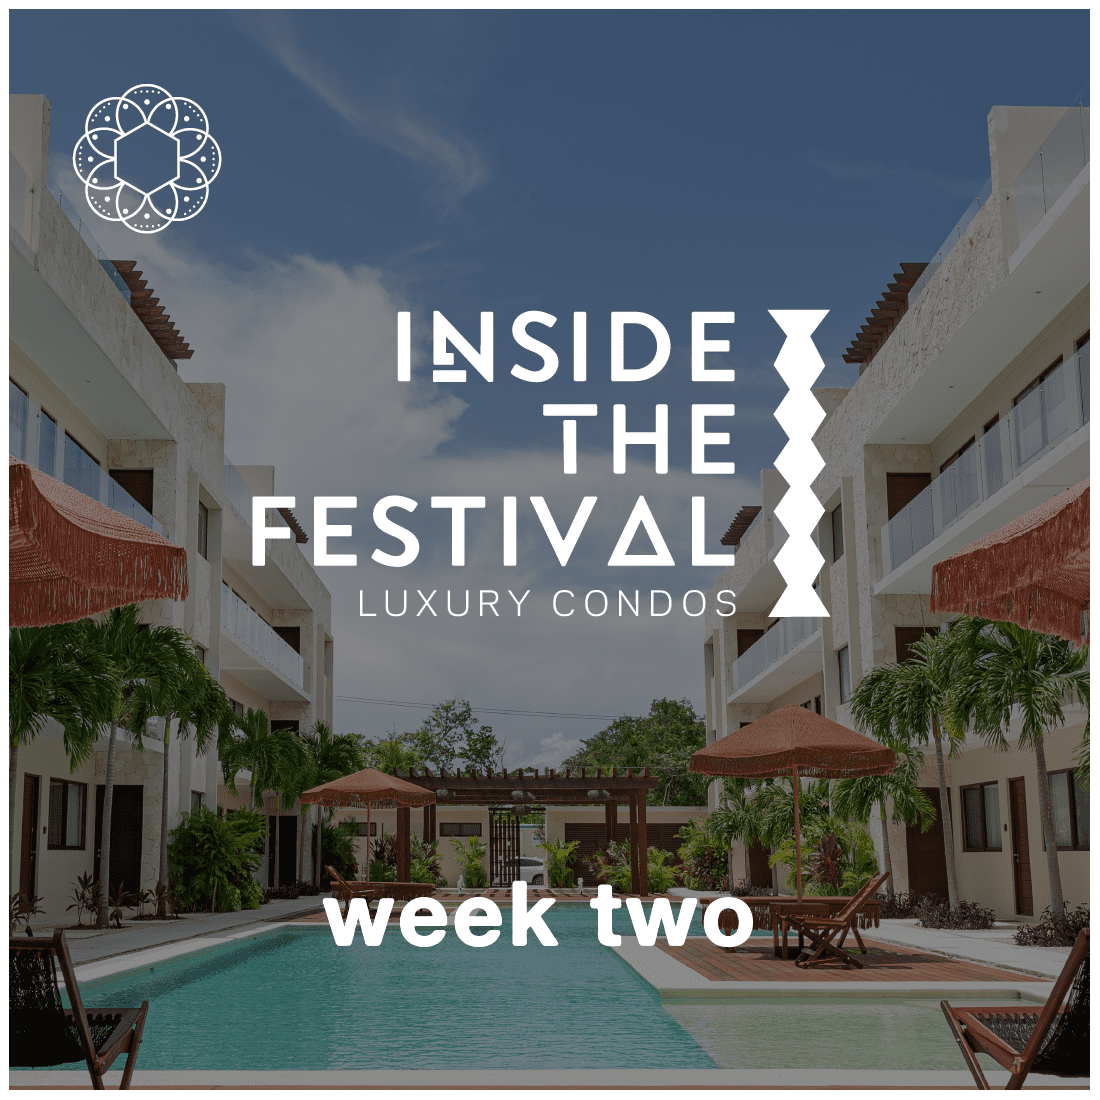 INSIDE THE FESTIVAL: 7 nights at Luxury Condo + Backstage Tickets - Week 2